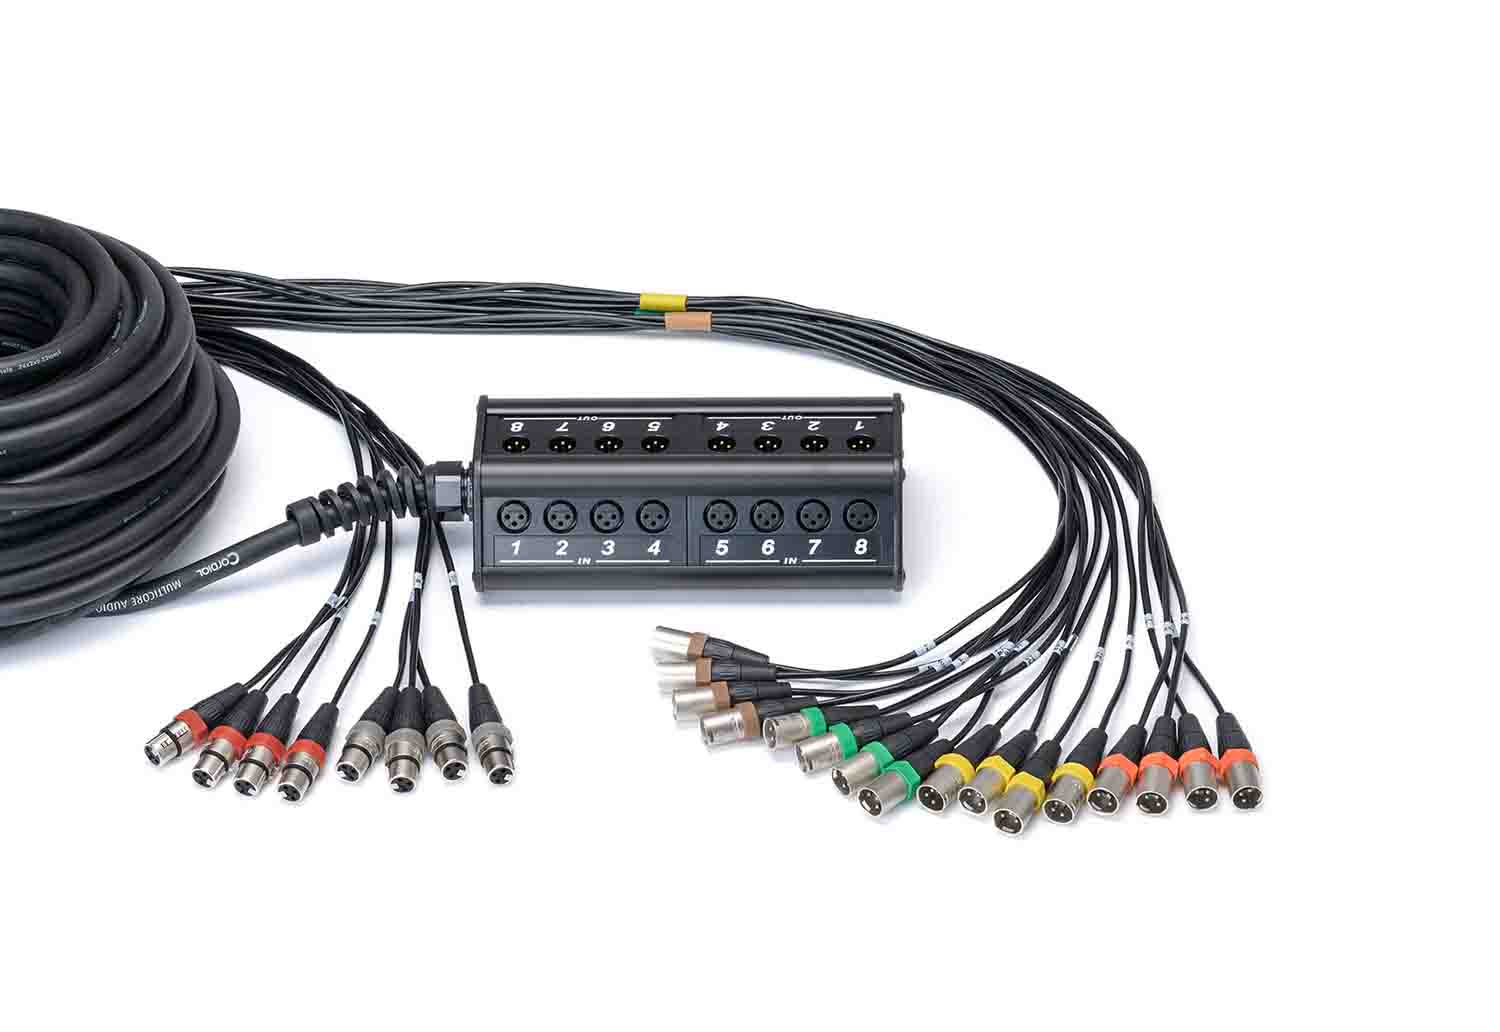 Cordial CYB16-8C, Multicore System with 16 IN 8 OUT - 30 Meter - Hollywood DJ